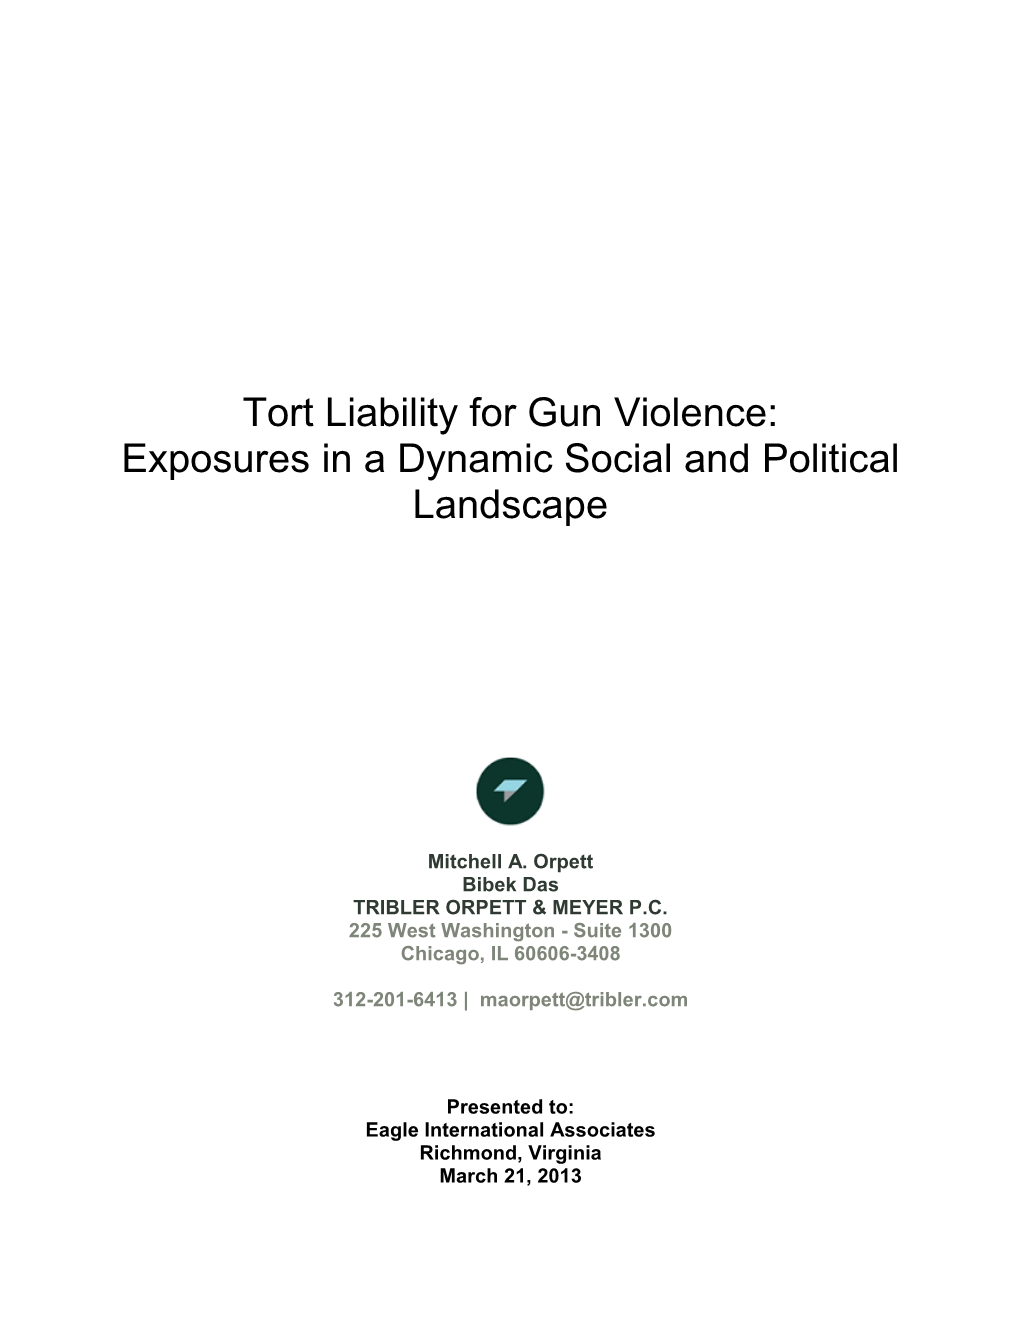 Tort Liability for Gun Violence: Exposures in a Dynamic Social and Political Landscape